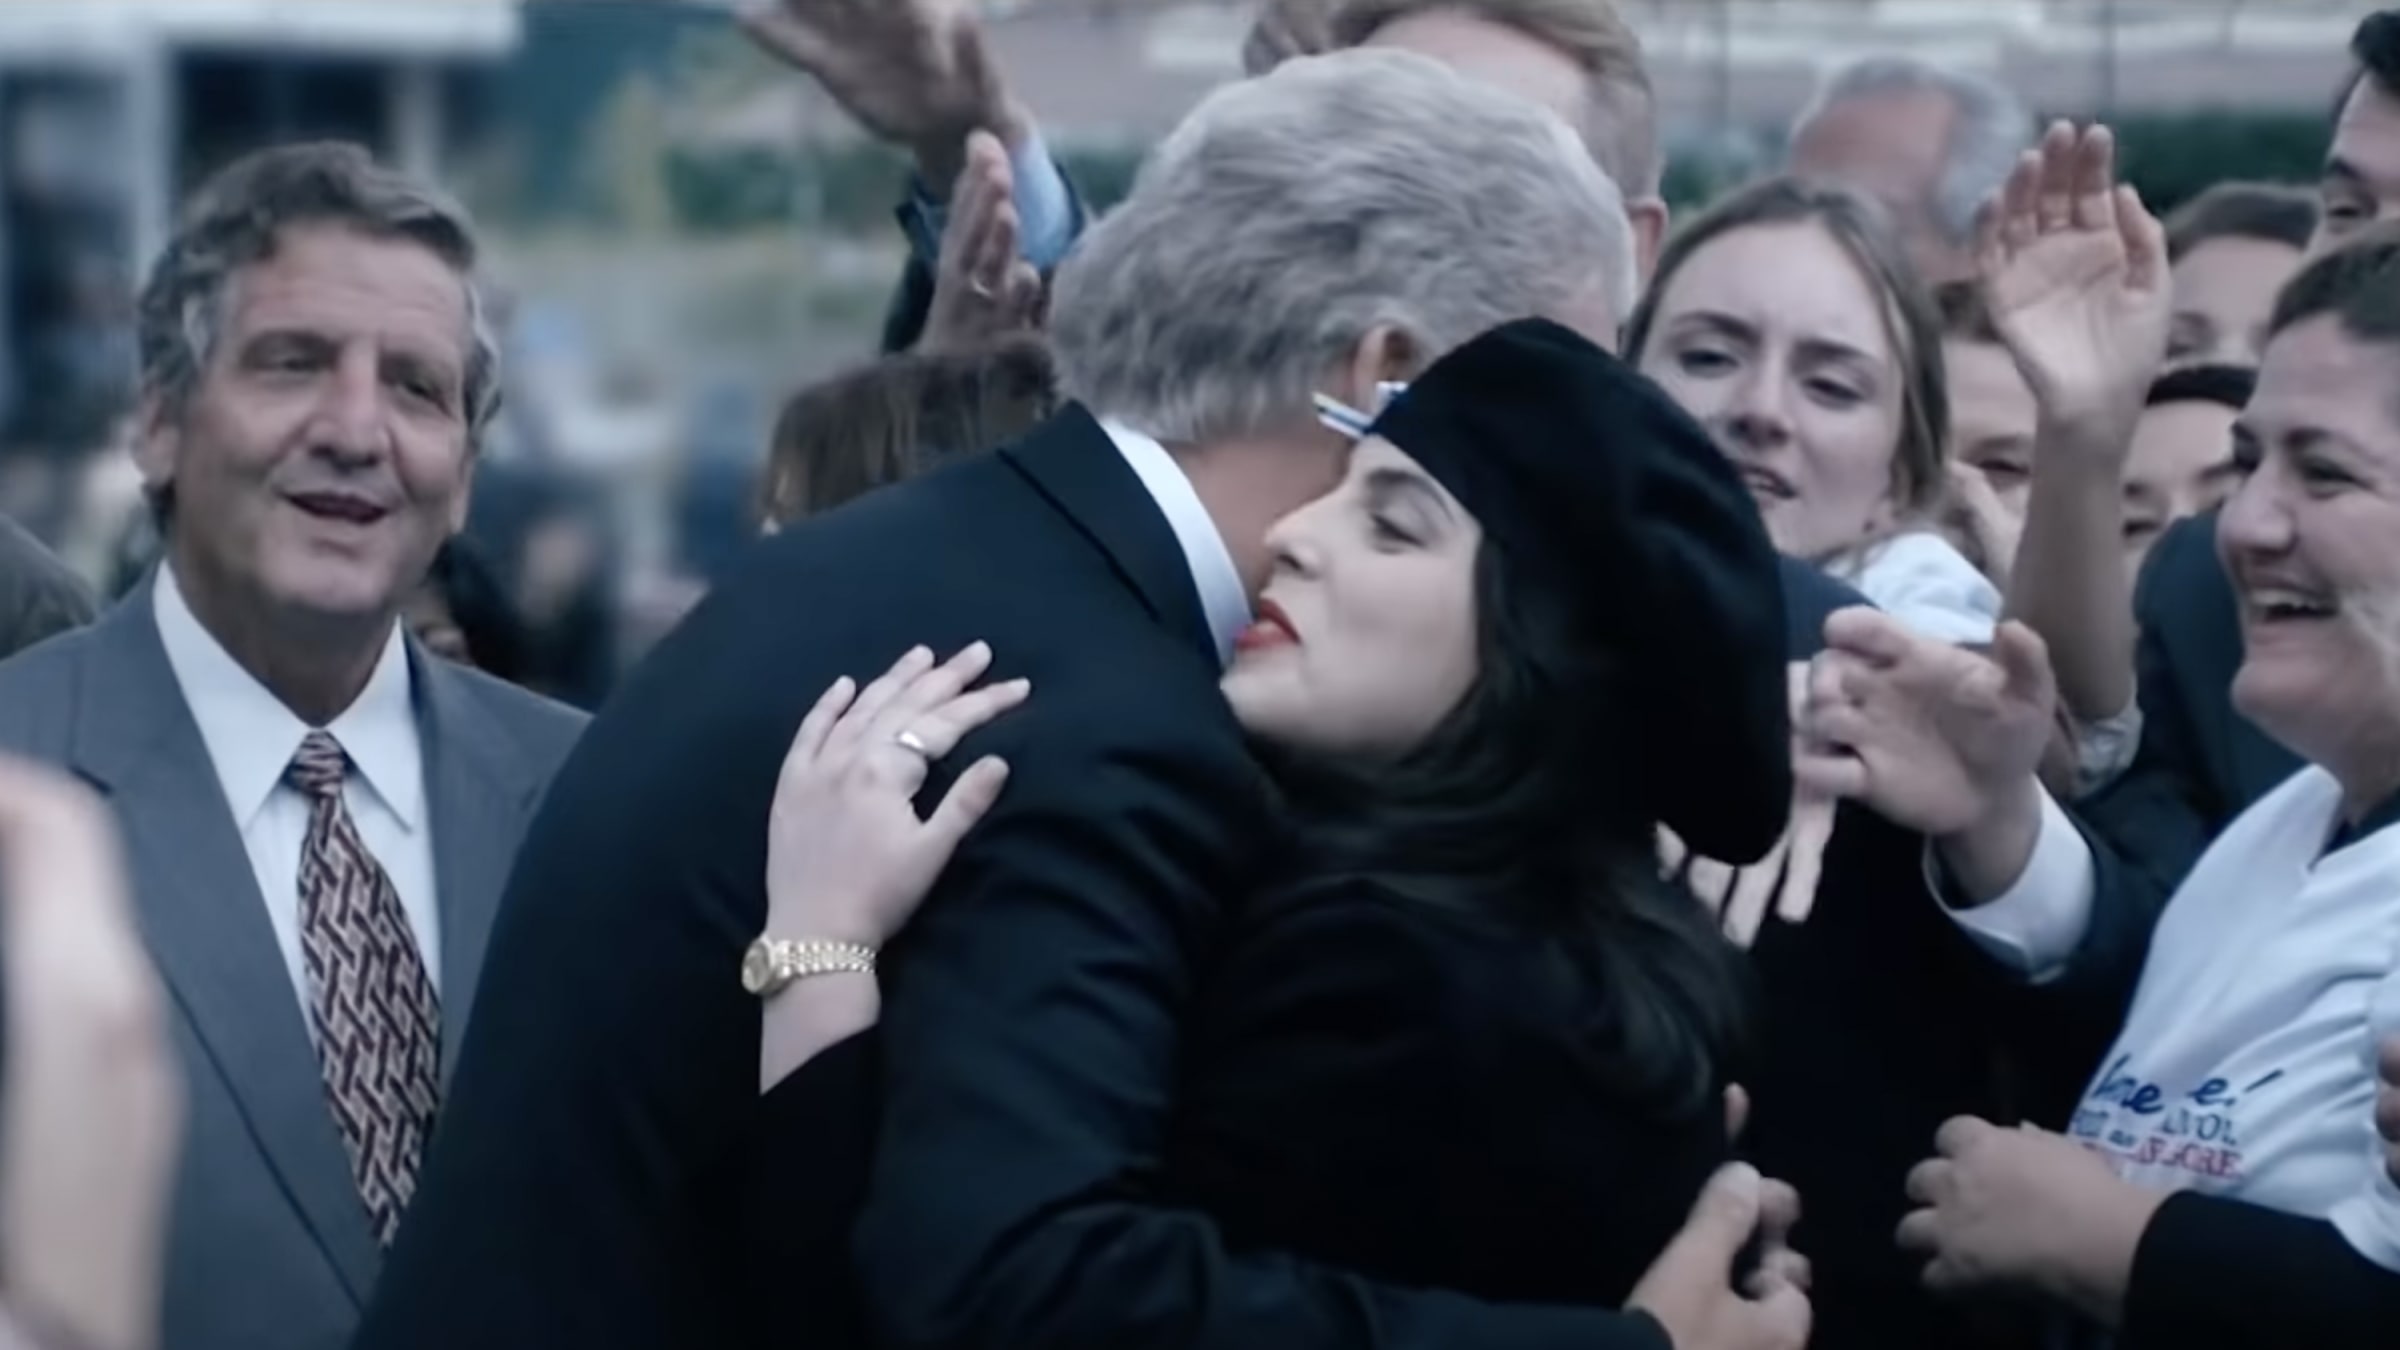 Where Is Monica Lewinsky Now? A Look at Her Life 25 Years After